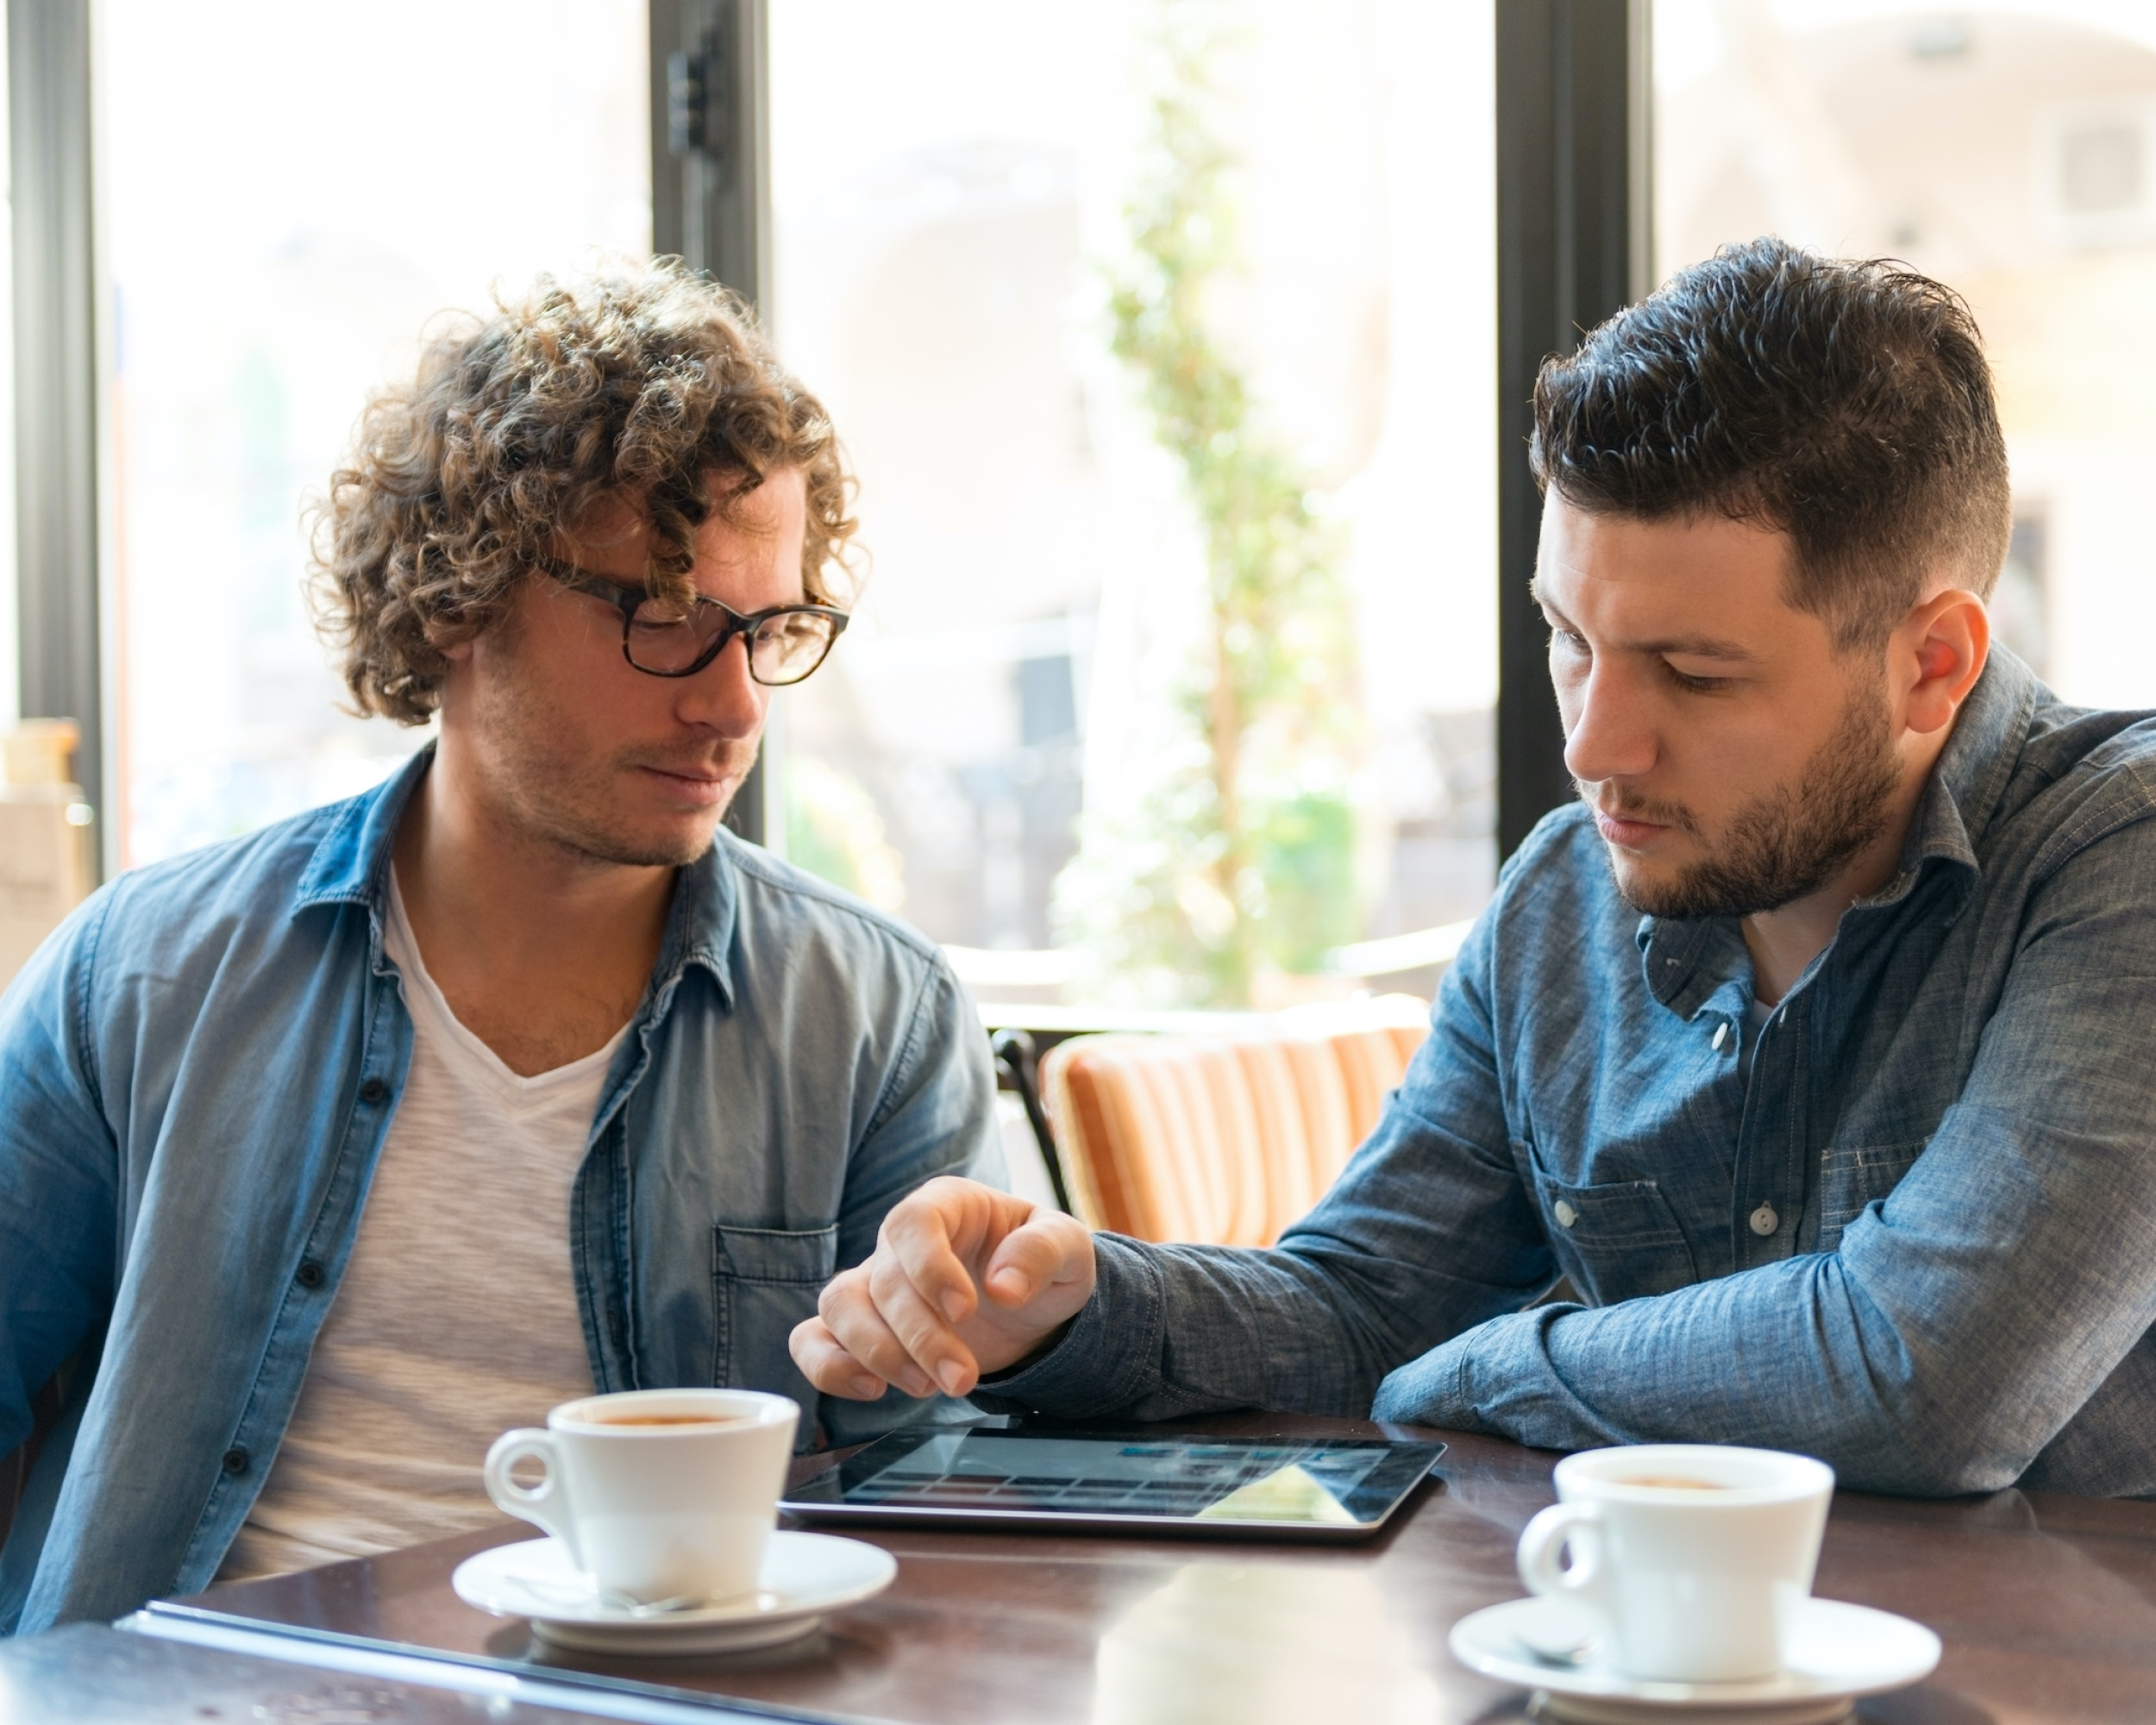 Two men working together in a coffee shop